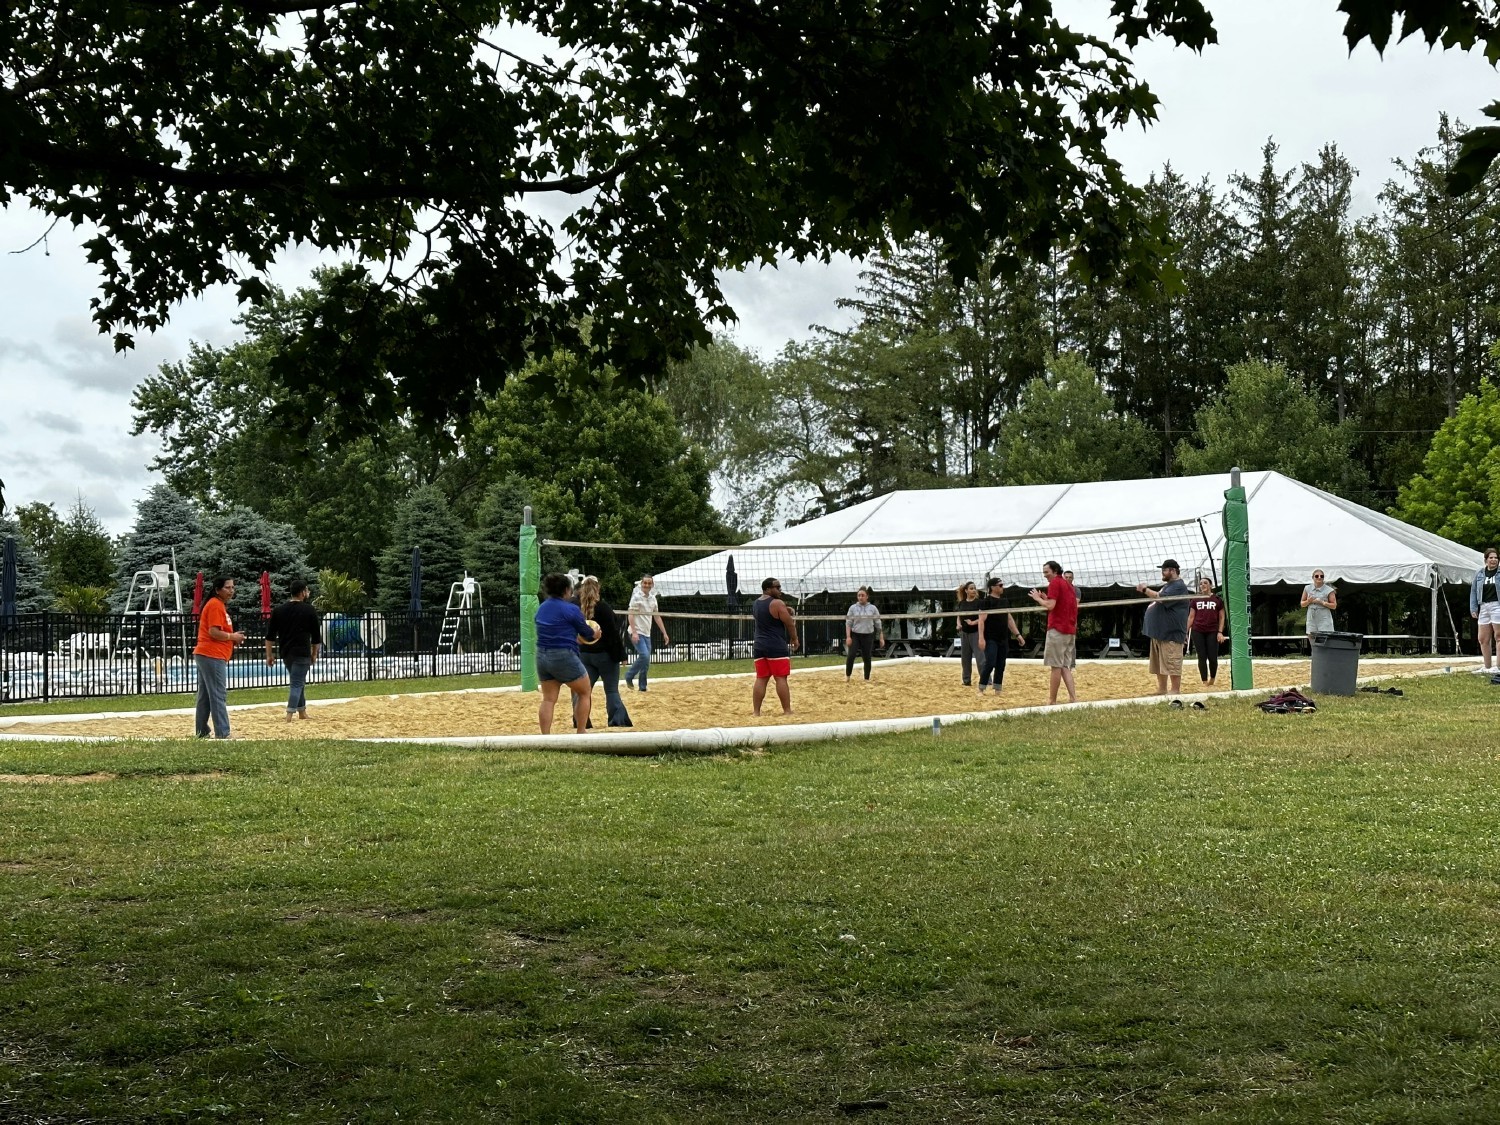 Fun and games at our company summer picnic